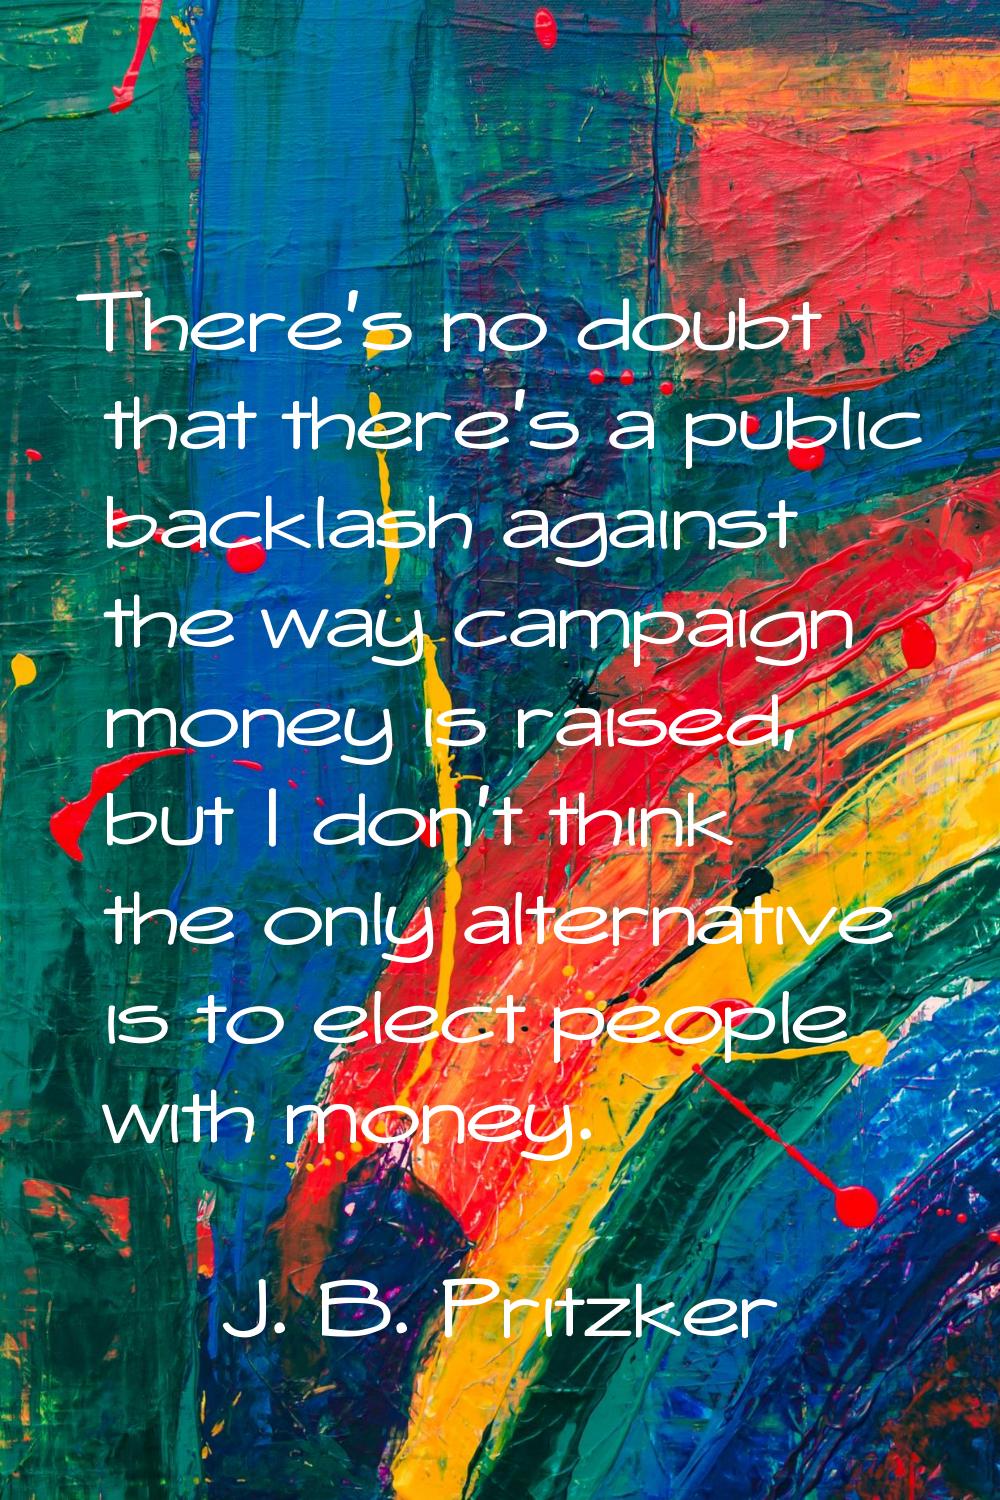 There's no doubt that there's a public backlash against the way campaign money is raised, but I don